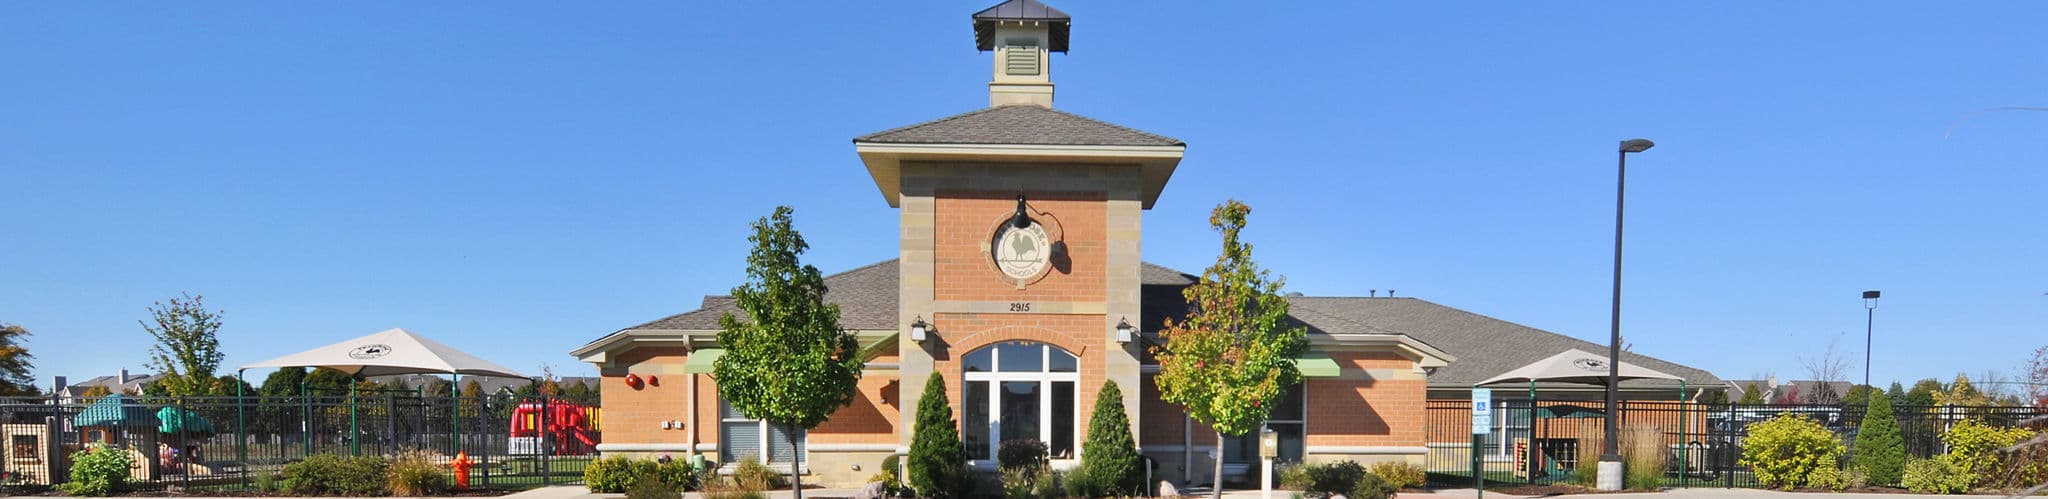 Exterior of a Primrose School at Naperville Crossings